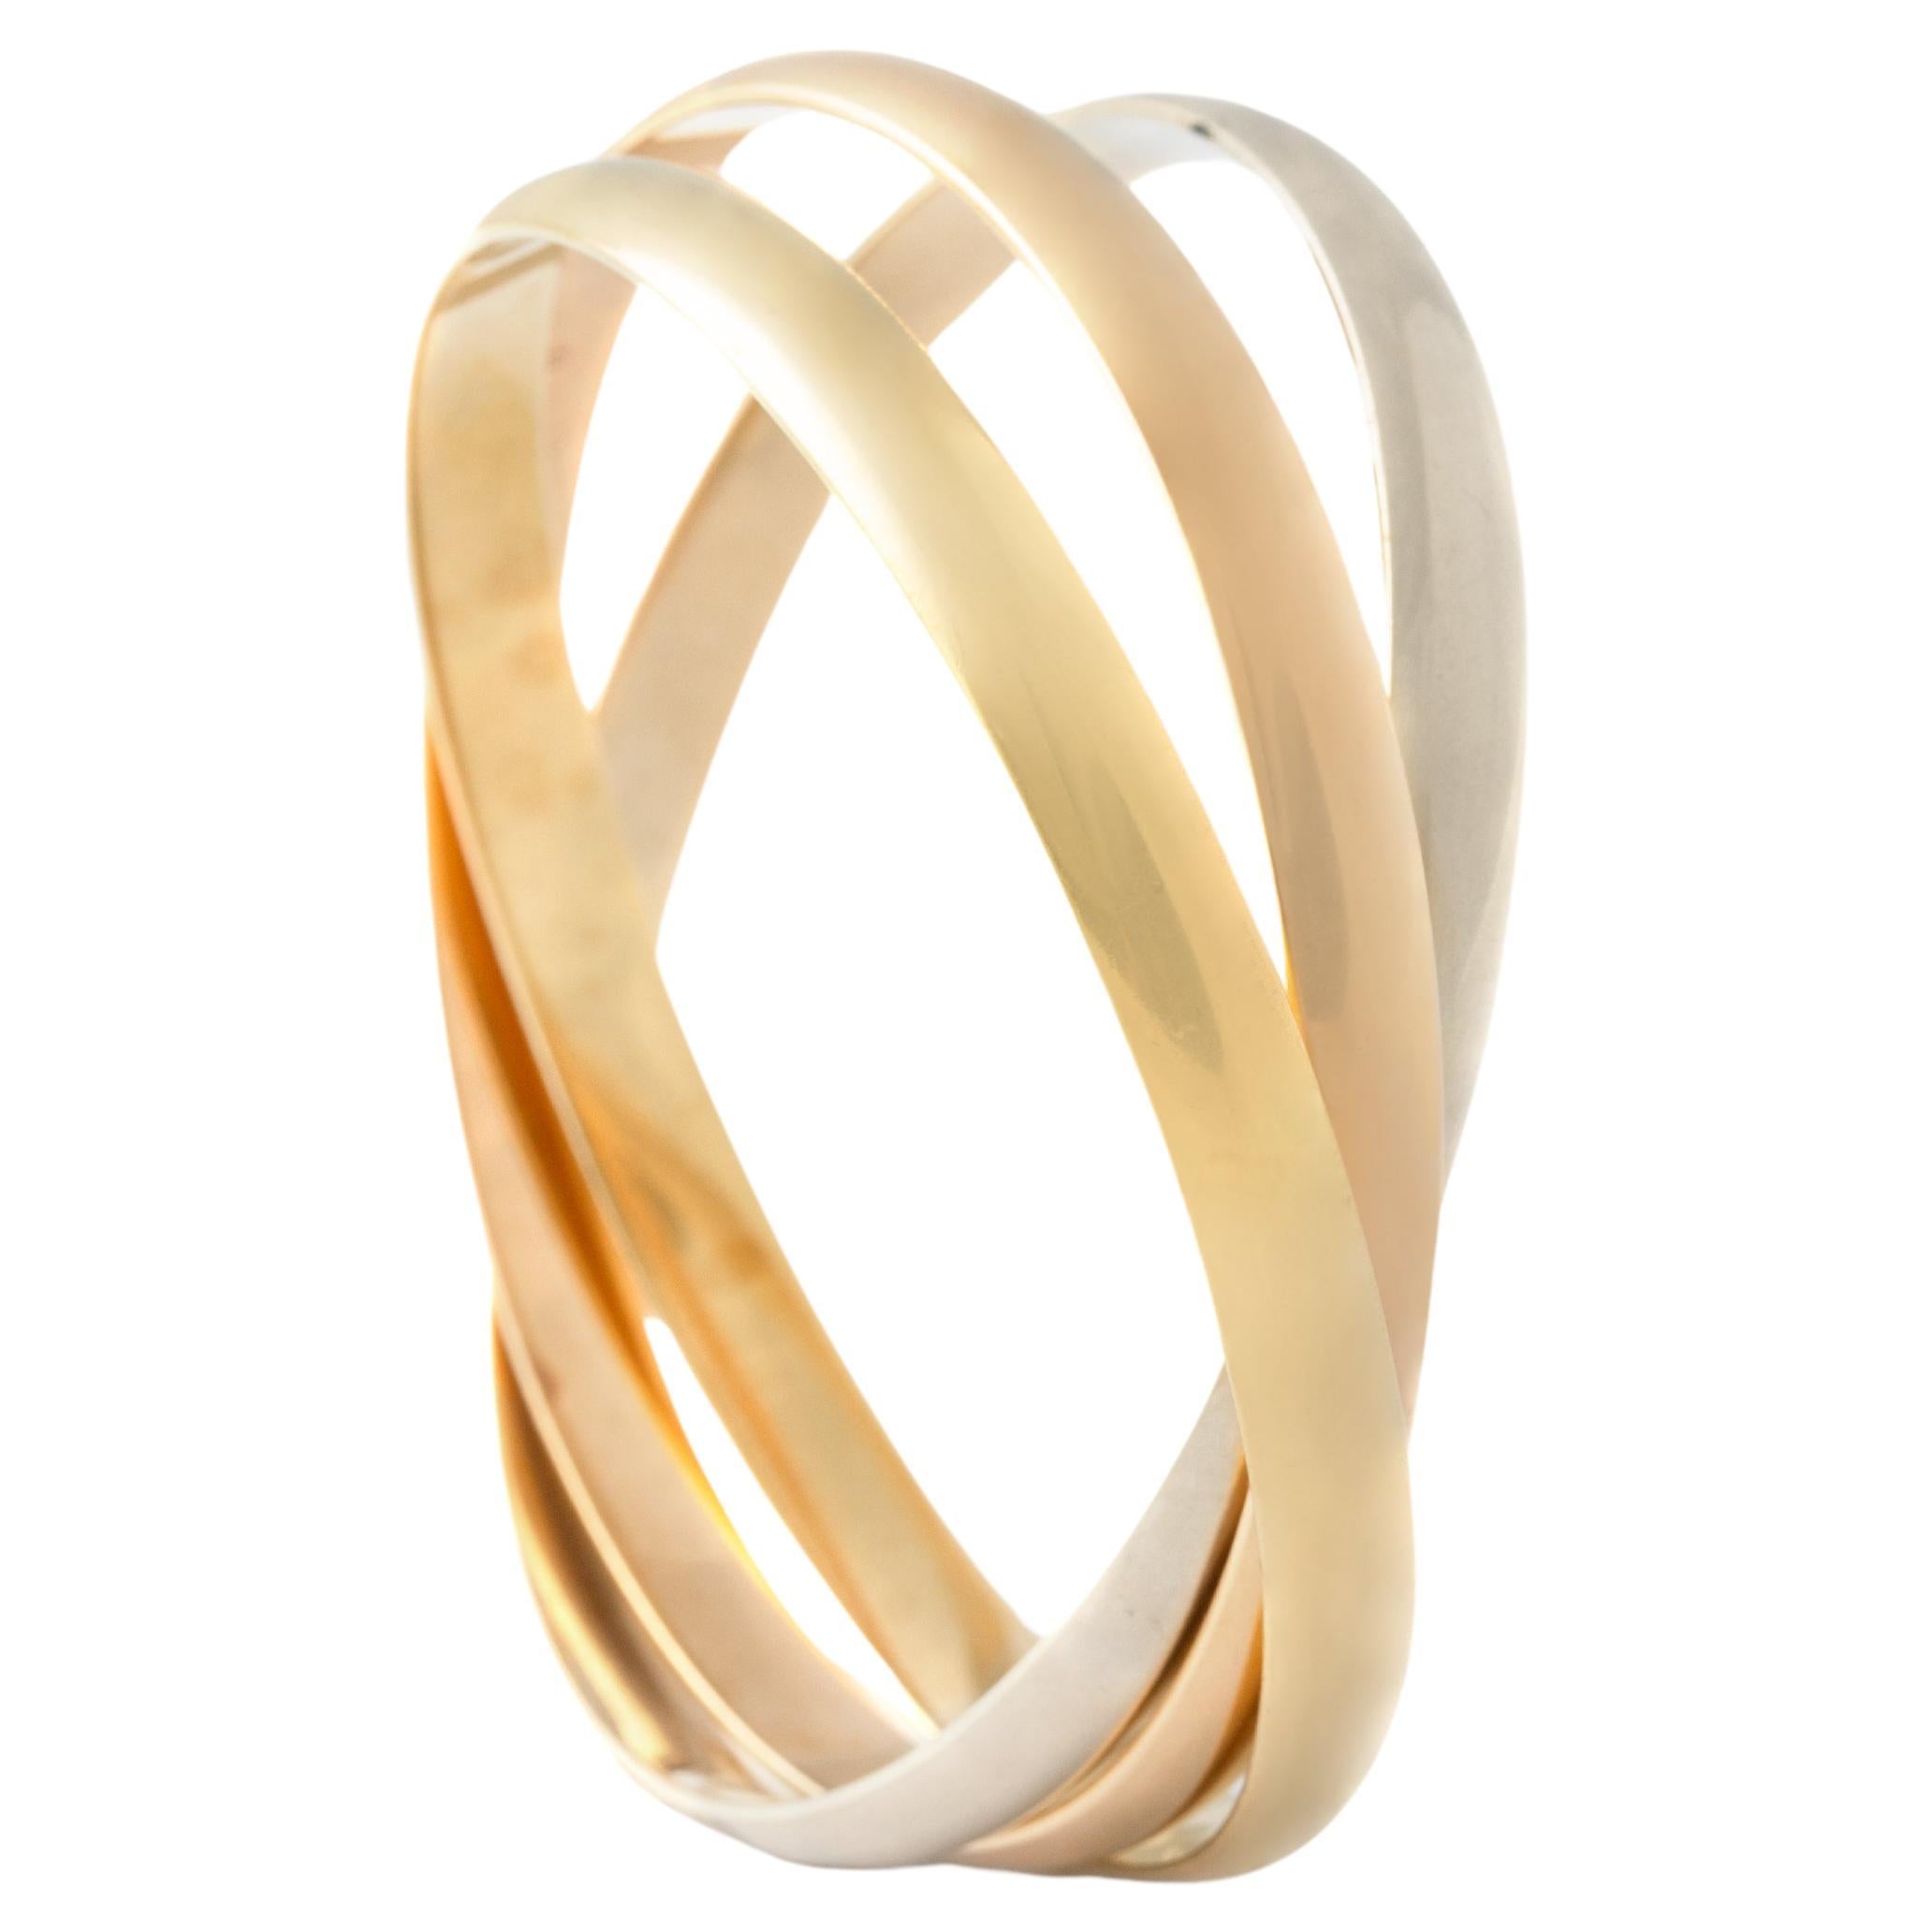 Cartier Trinity Bracelet tri-color Gold 18K.

Signed Cartier, numbered and marked.
Total weight: 81.36 grams.

Introducing the Trinity bracelet from Cartier's iconic collection. 
Crafted with exquisite attention to detail, this bracelet features